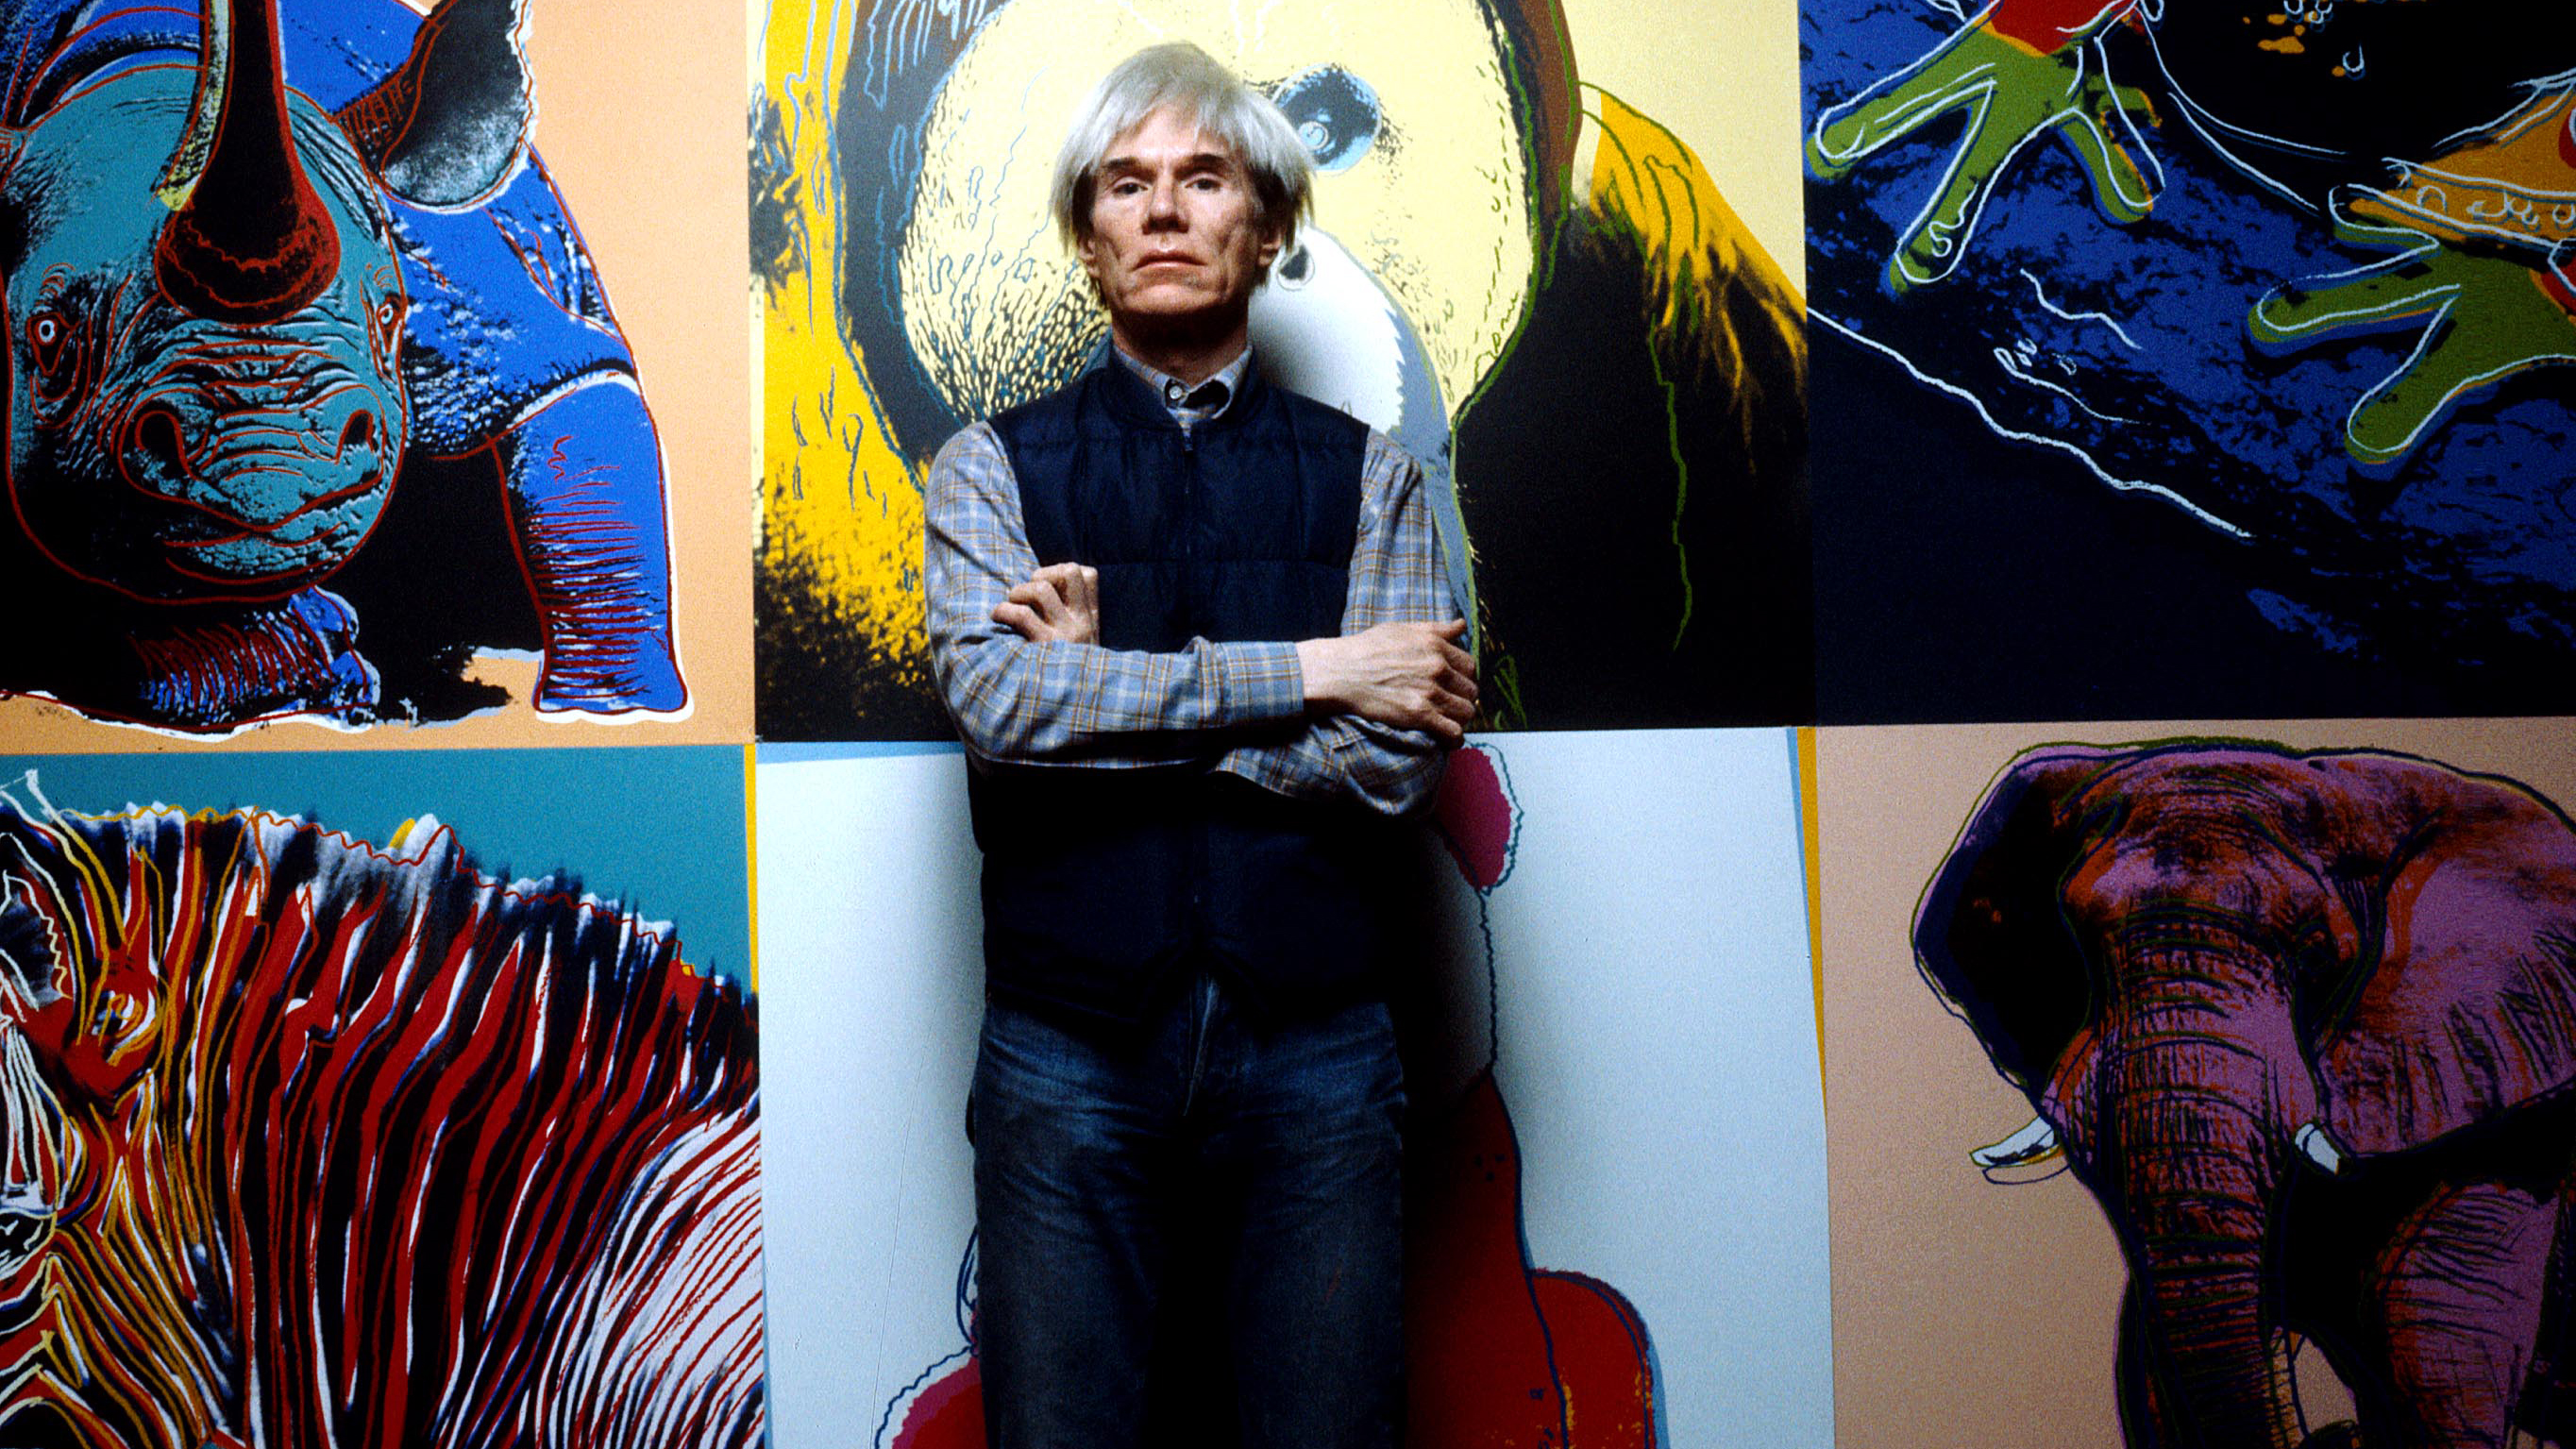 Andy Warhol (Crédito: Shutterstock)
